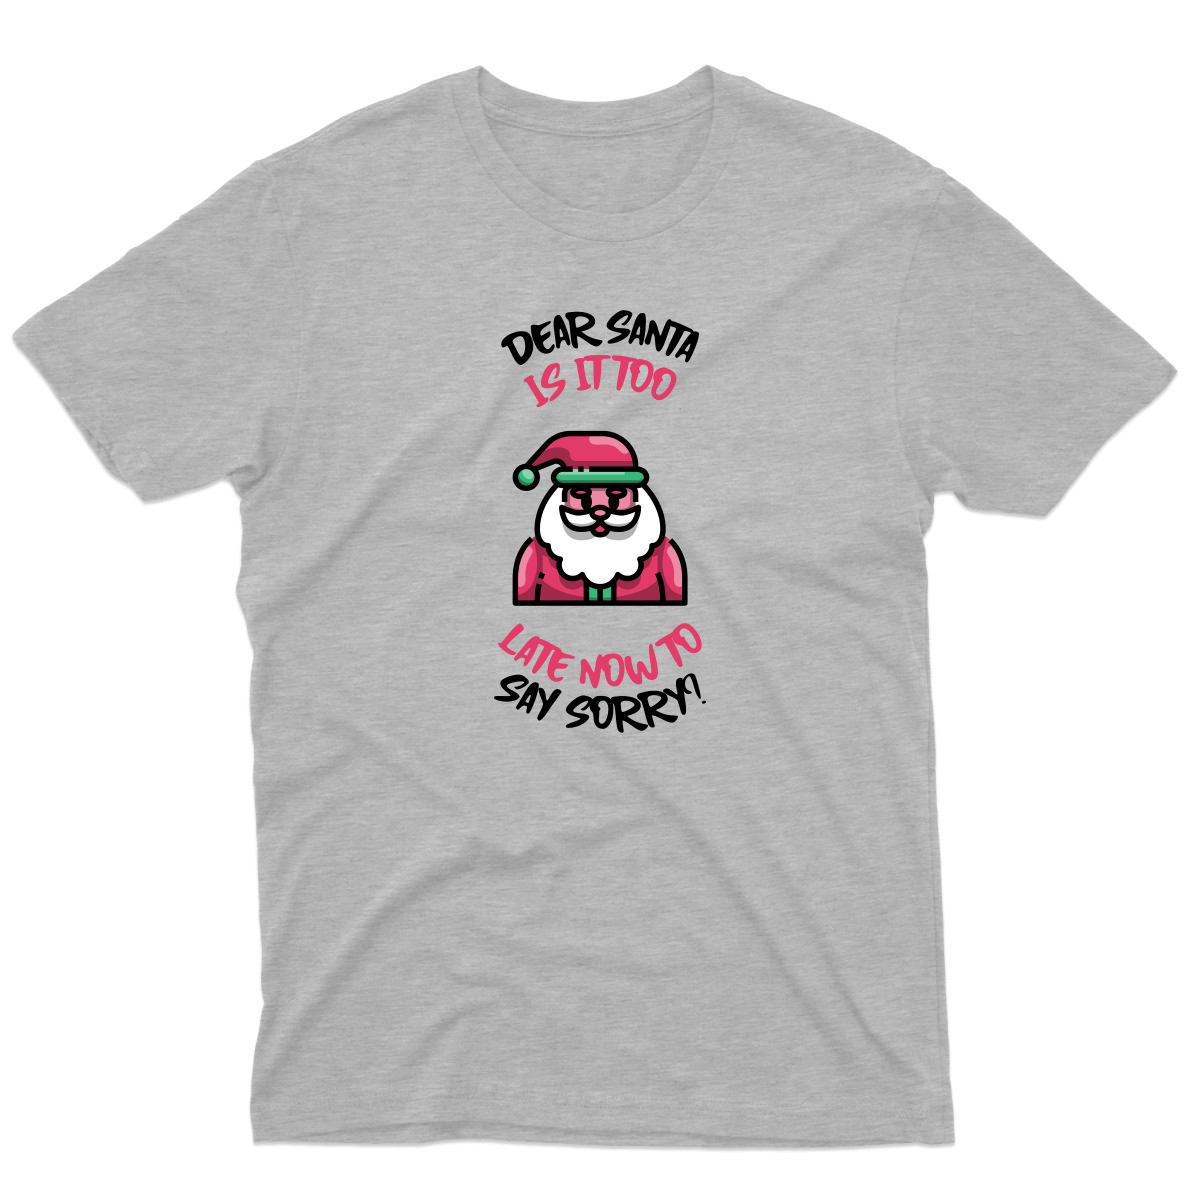 Dear Santa, Is It Too Late to Say Sorry? Men's T-shirt | Gray